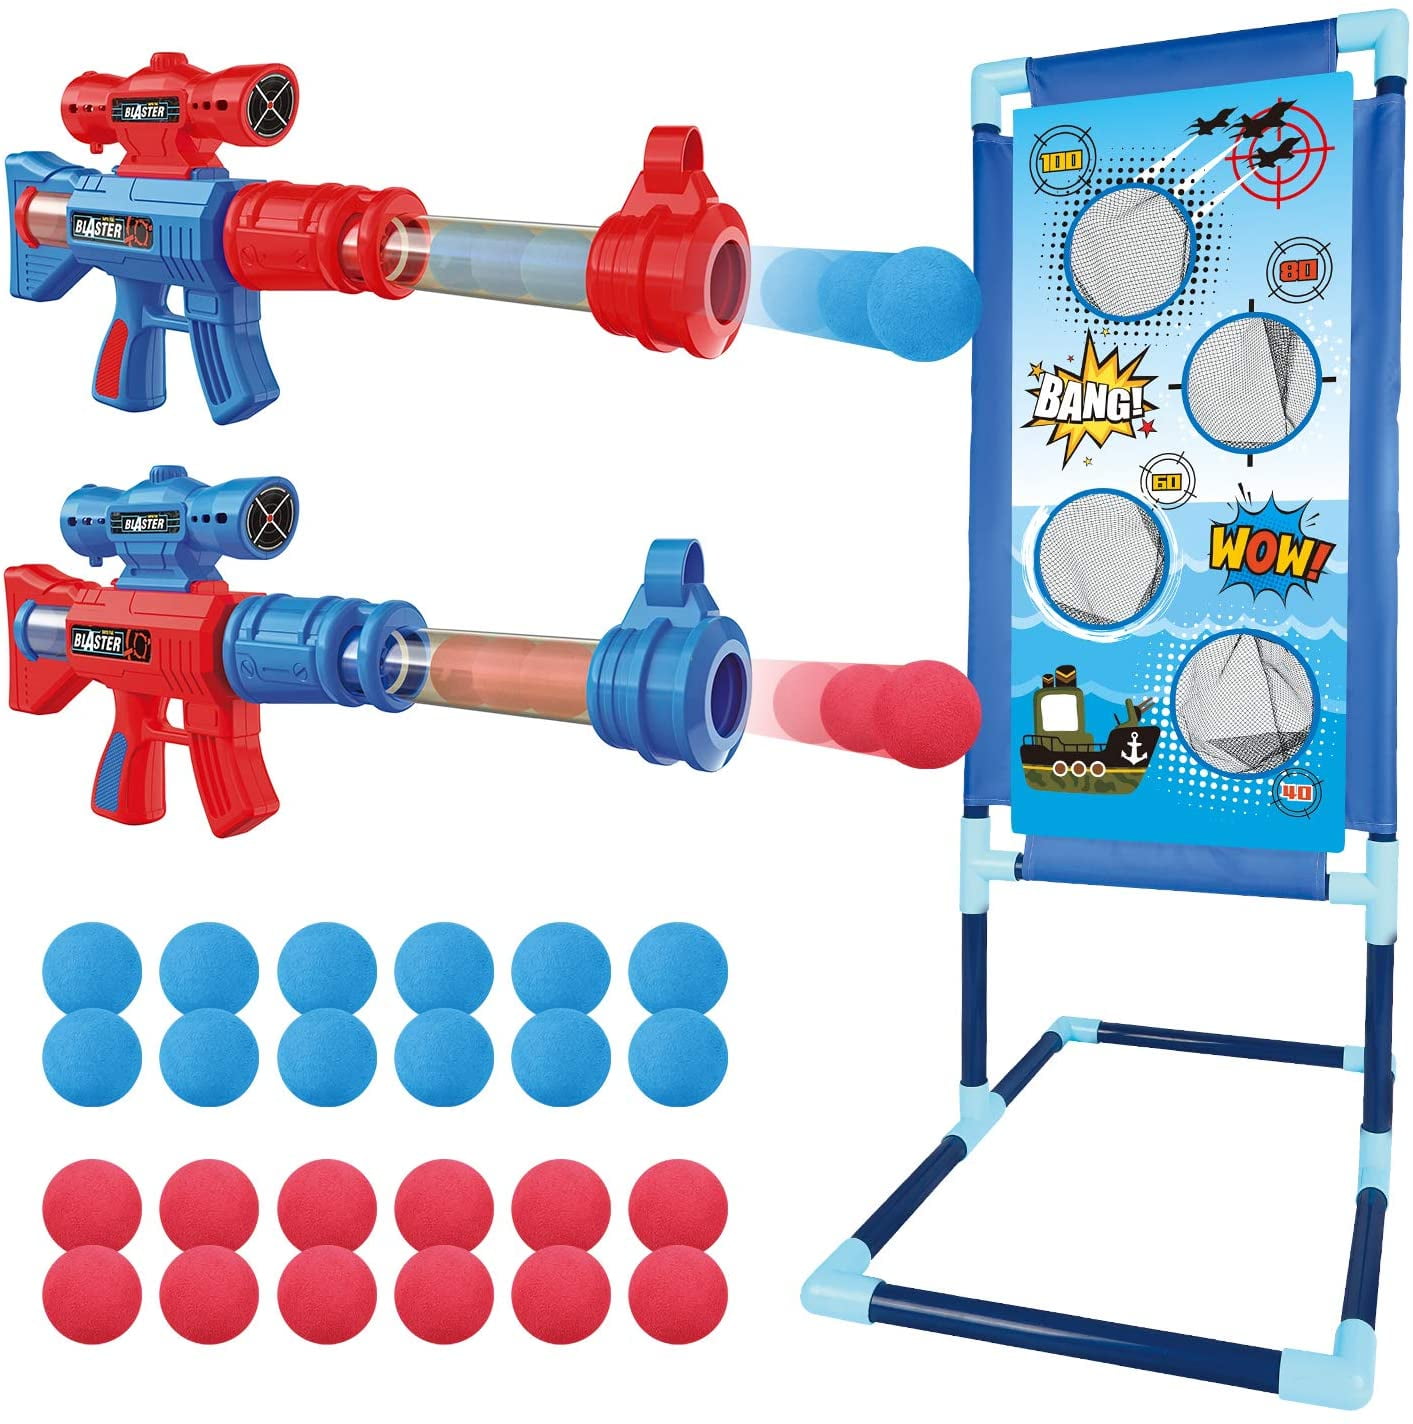 Years Olds Boys and Girls 2pk Foam Ball Popper Air Guns & Standing Target & 24 Foam Balls,Ideal Gift for 5 6 7 8 9 10 HIDMED Shooting Game Toy for Kids 